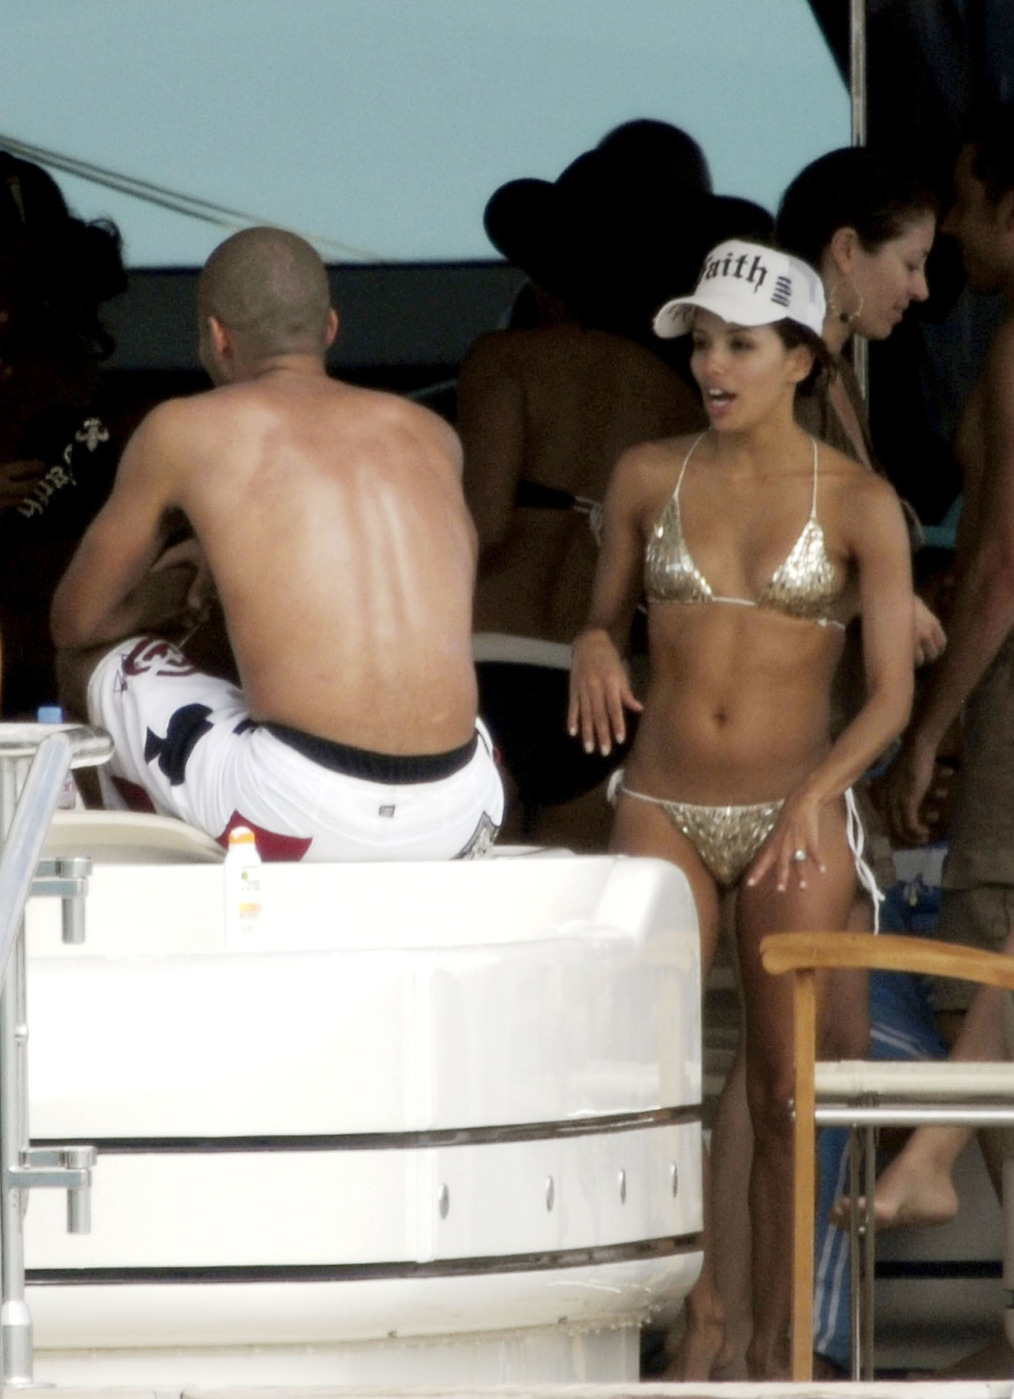 On the deck of a yacht this week, Eva Longoria Parker appears to have lost 